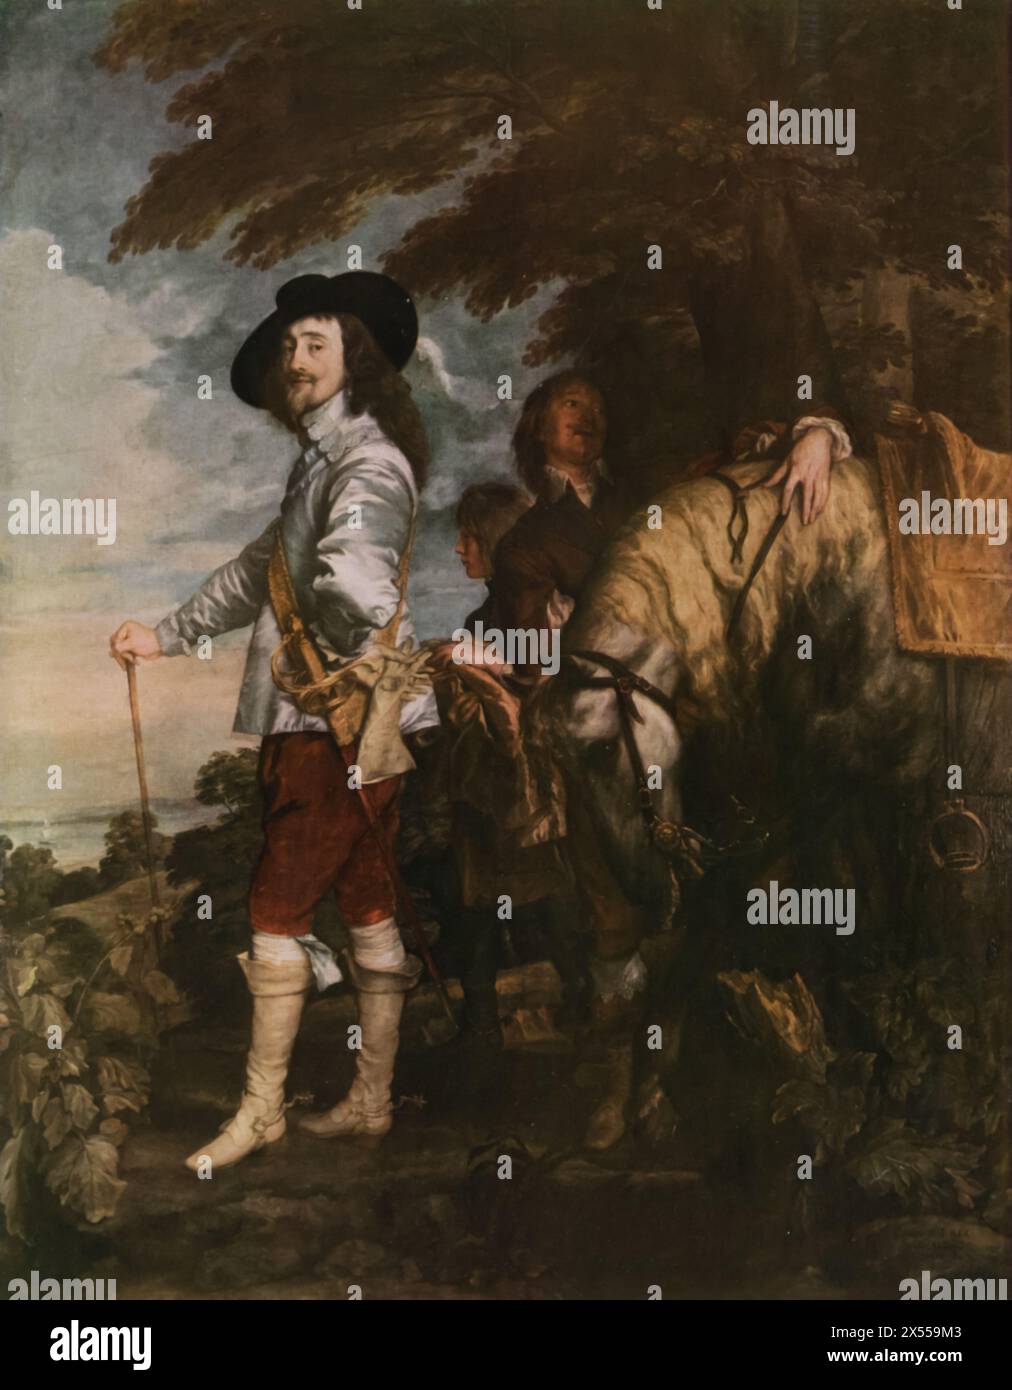 Portrait of Charles I of England' by Anthony van Dyck, painted in 1635, housed at the Louvre Museum, Paris, France. Court painter to Charles I, Van Dyck captures the dignified presence of the English monarch. The work is celebrated for its sophisticated composition and the insightful depiction of Charles's character. Stock Photo